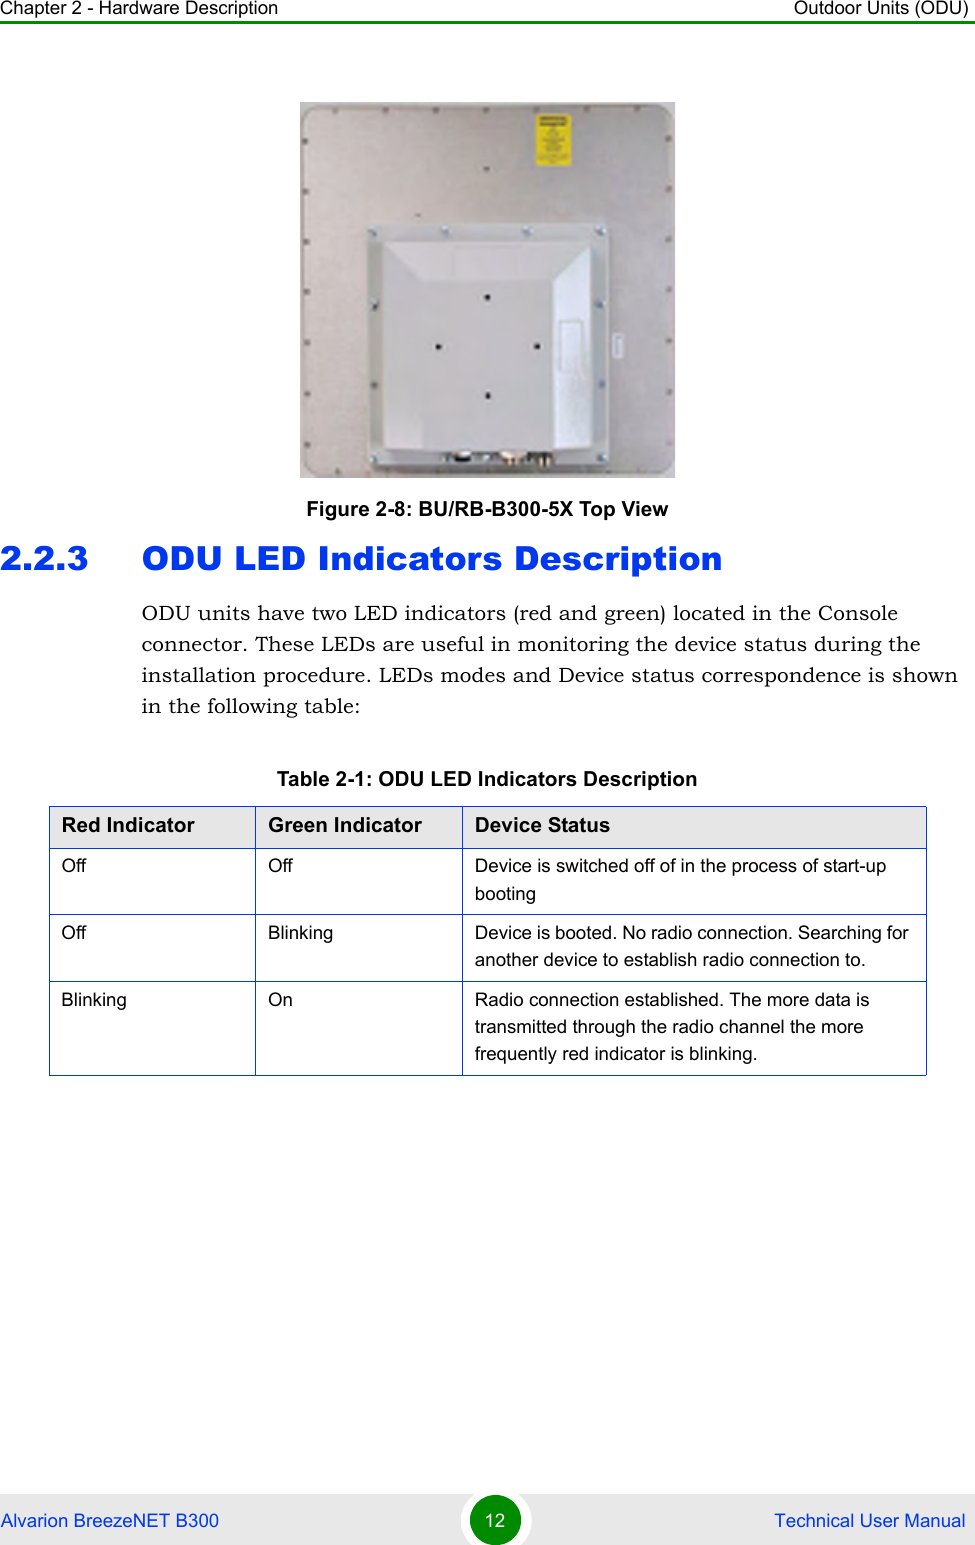 Chapter 2 - Hardware Description Outdoor Units (ODU)Alvarion BreezeNET B300 12  Technical User Manual2.2.3 ODU LED Indicators DescriptionODU units have two LED indicators (red and green) located in the Console connector. These LEDs are useful in monitoring the device status during the installation procedure. LEDs modes and Device status correspondence is shown in the following table:Figure 2-8: BU/RB-B300-5X Top ViewTable 2-1: ODU LED Indicators DescriptionRed Indicator Green Indicator Device StatusOff Off Device is switched off of in the process of start-up bootingOff Blinking Device is booted. No radio connection. Searching for another device to establish radio connection to. Blinking On Radio connection established. The more data is transmitted through the radio channel the more frequently red indicator is blinking.